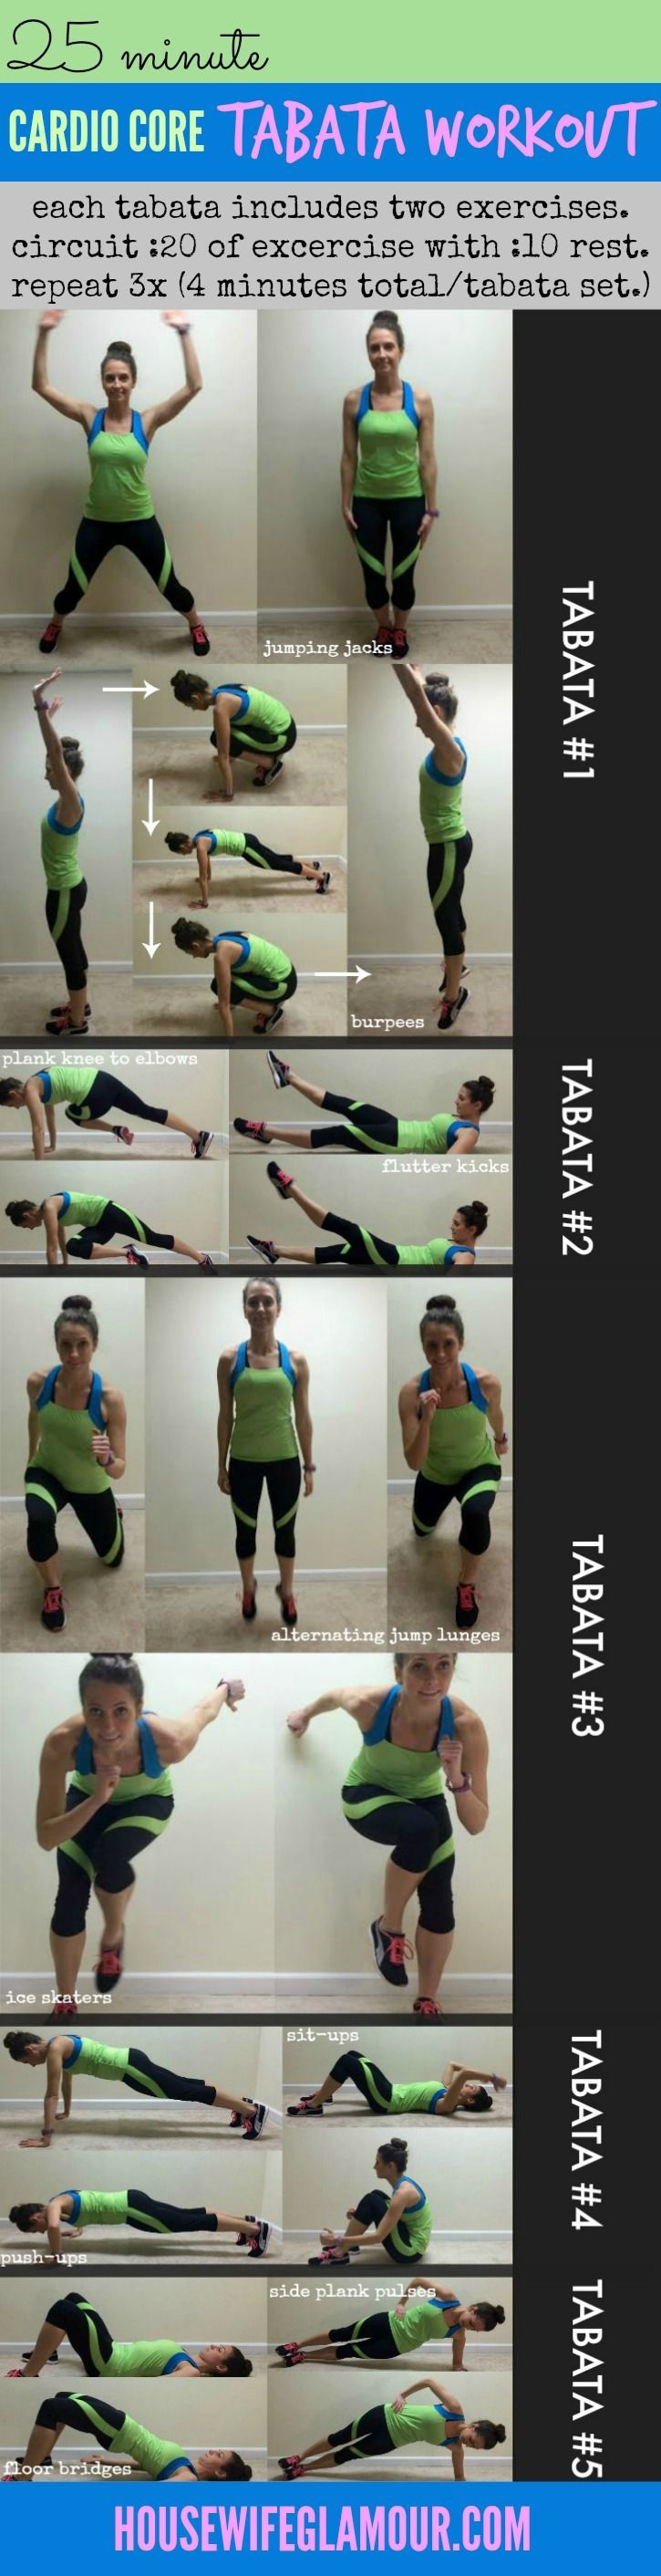 Kick off the new year with this 25 minute high intensity bodyweight workout you can complete at home! #FitFluential